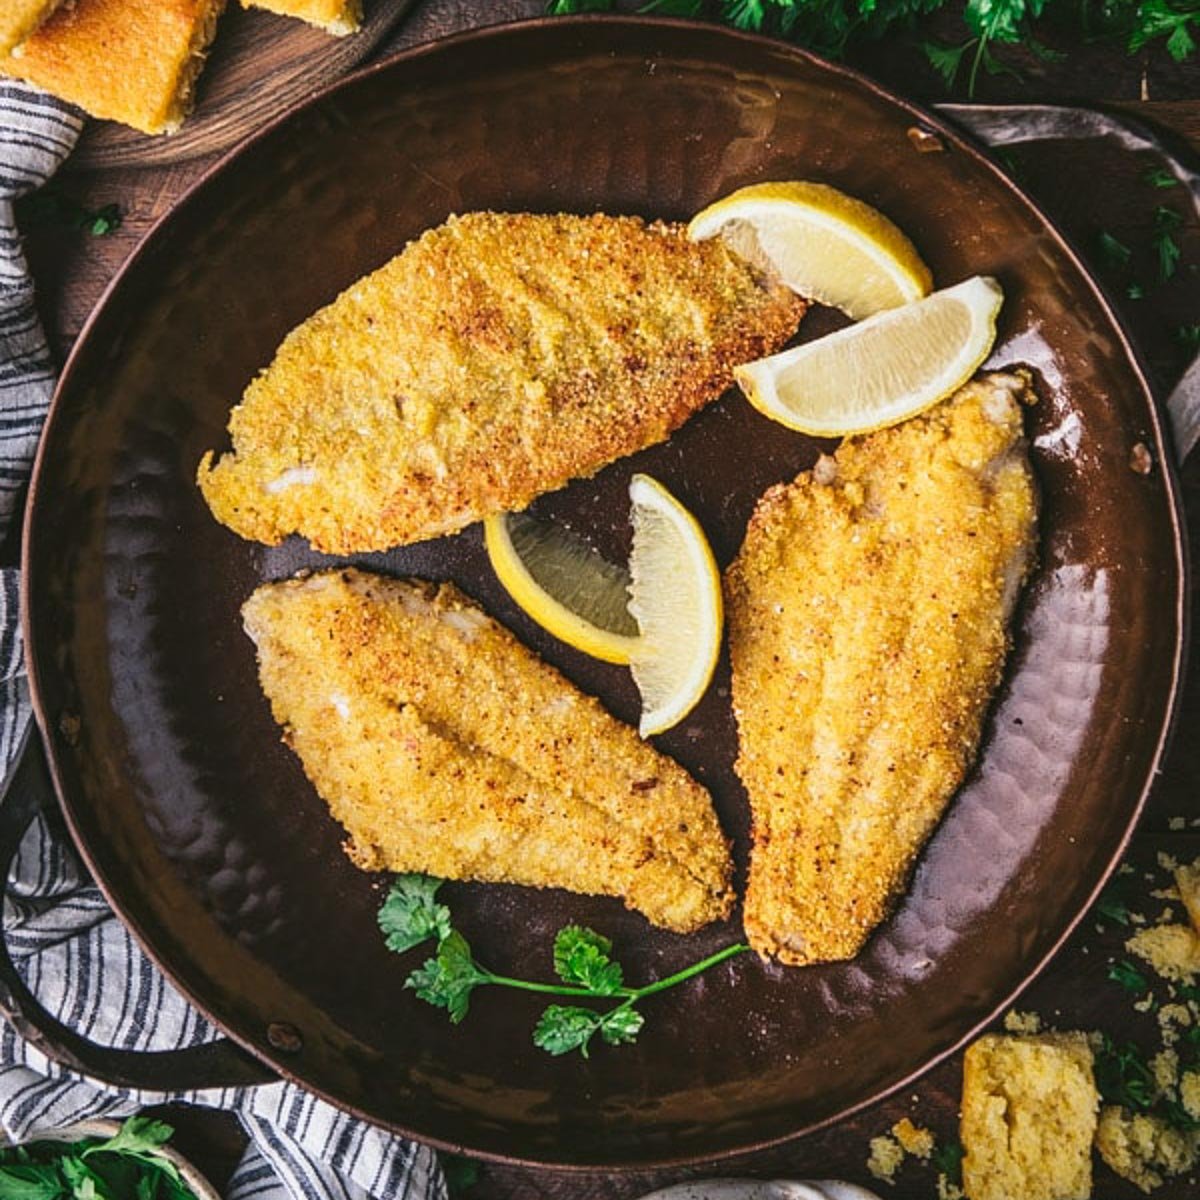 How to Fry Fish 3 Ways That Taste as Good as a Restaurant Meal